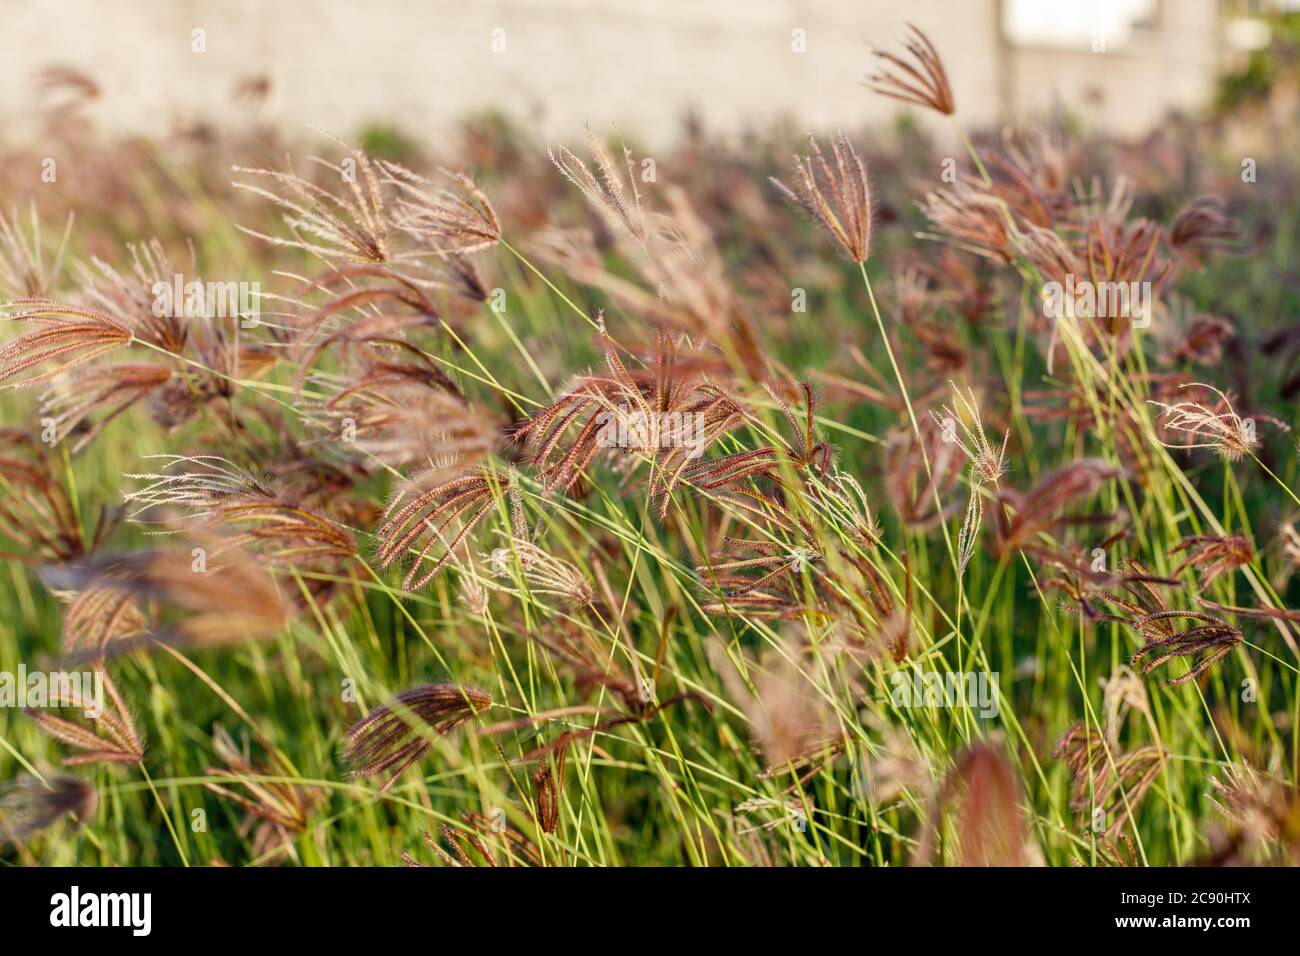 Chloris gayana or Rhodes grass growing on the field. Rural landscape. Bali Island, Indonesia. Natural background. Stock Photo